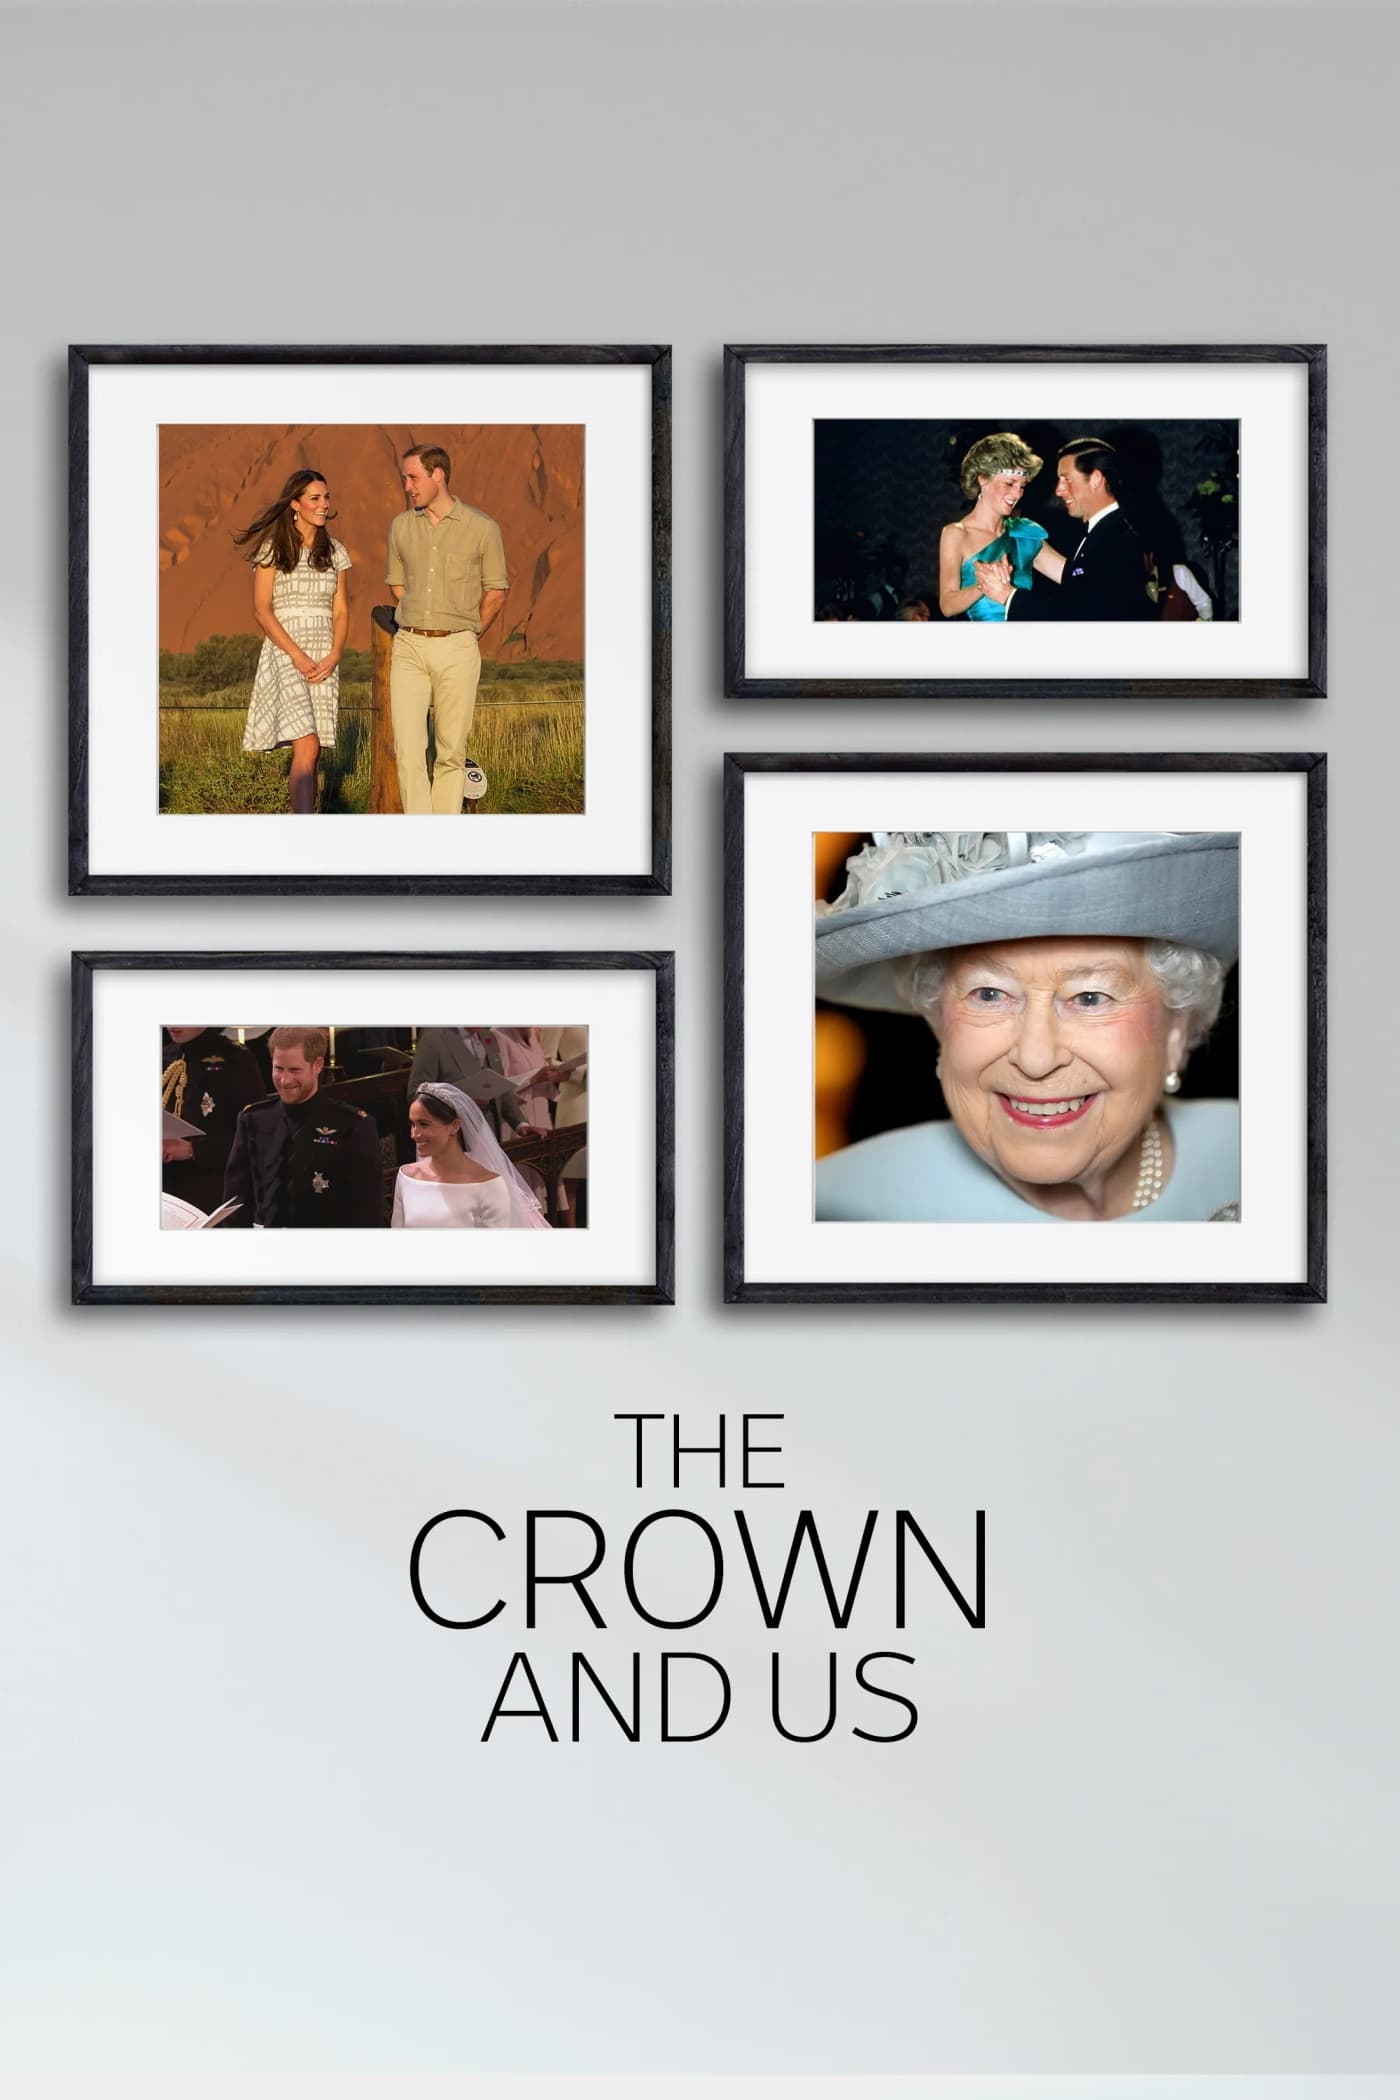 The Crown and Us: The Story of The Royals in Australia